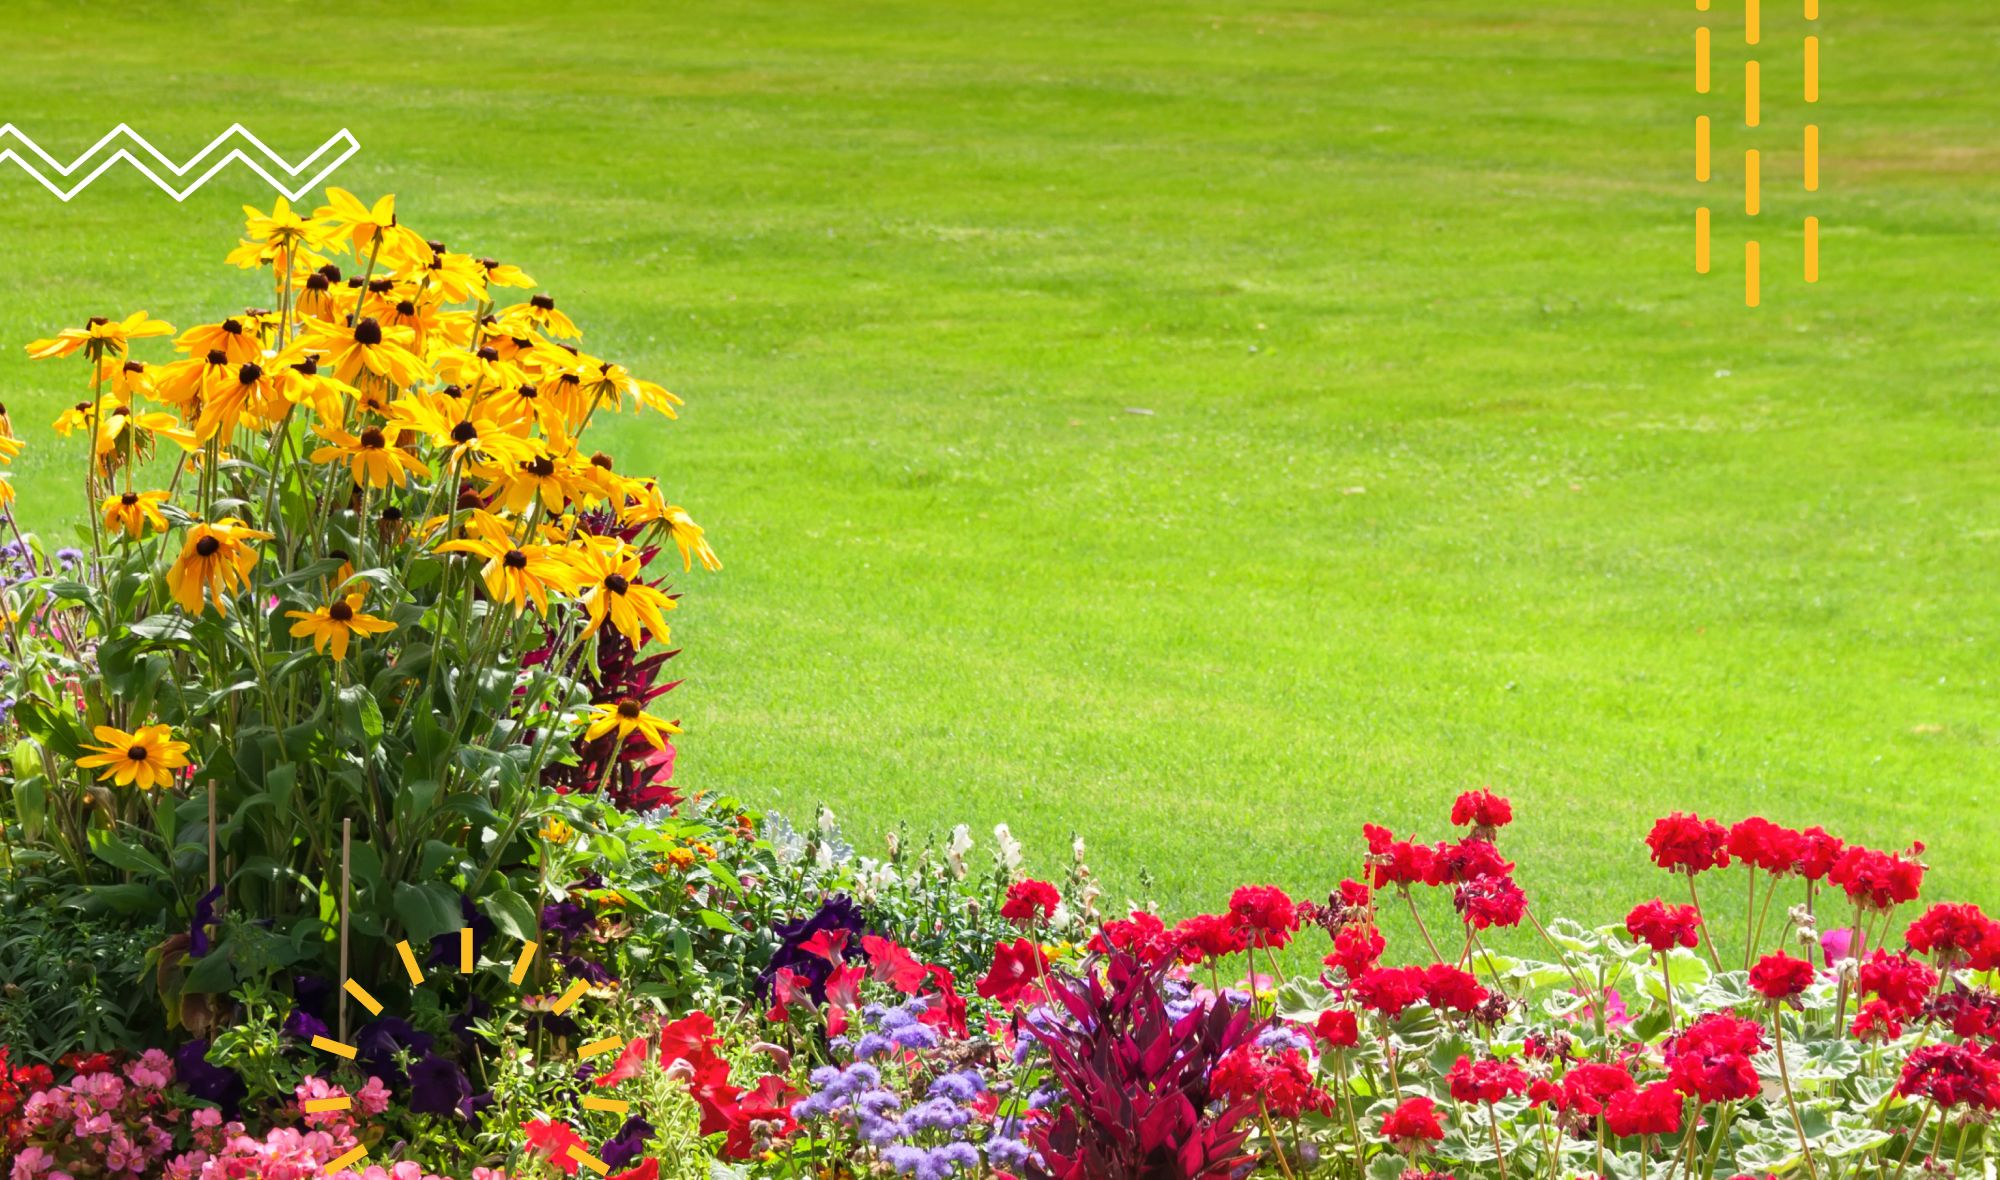 Achieving the greenest grass: a comprehensive guide to lawn care